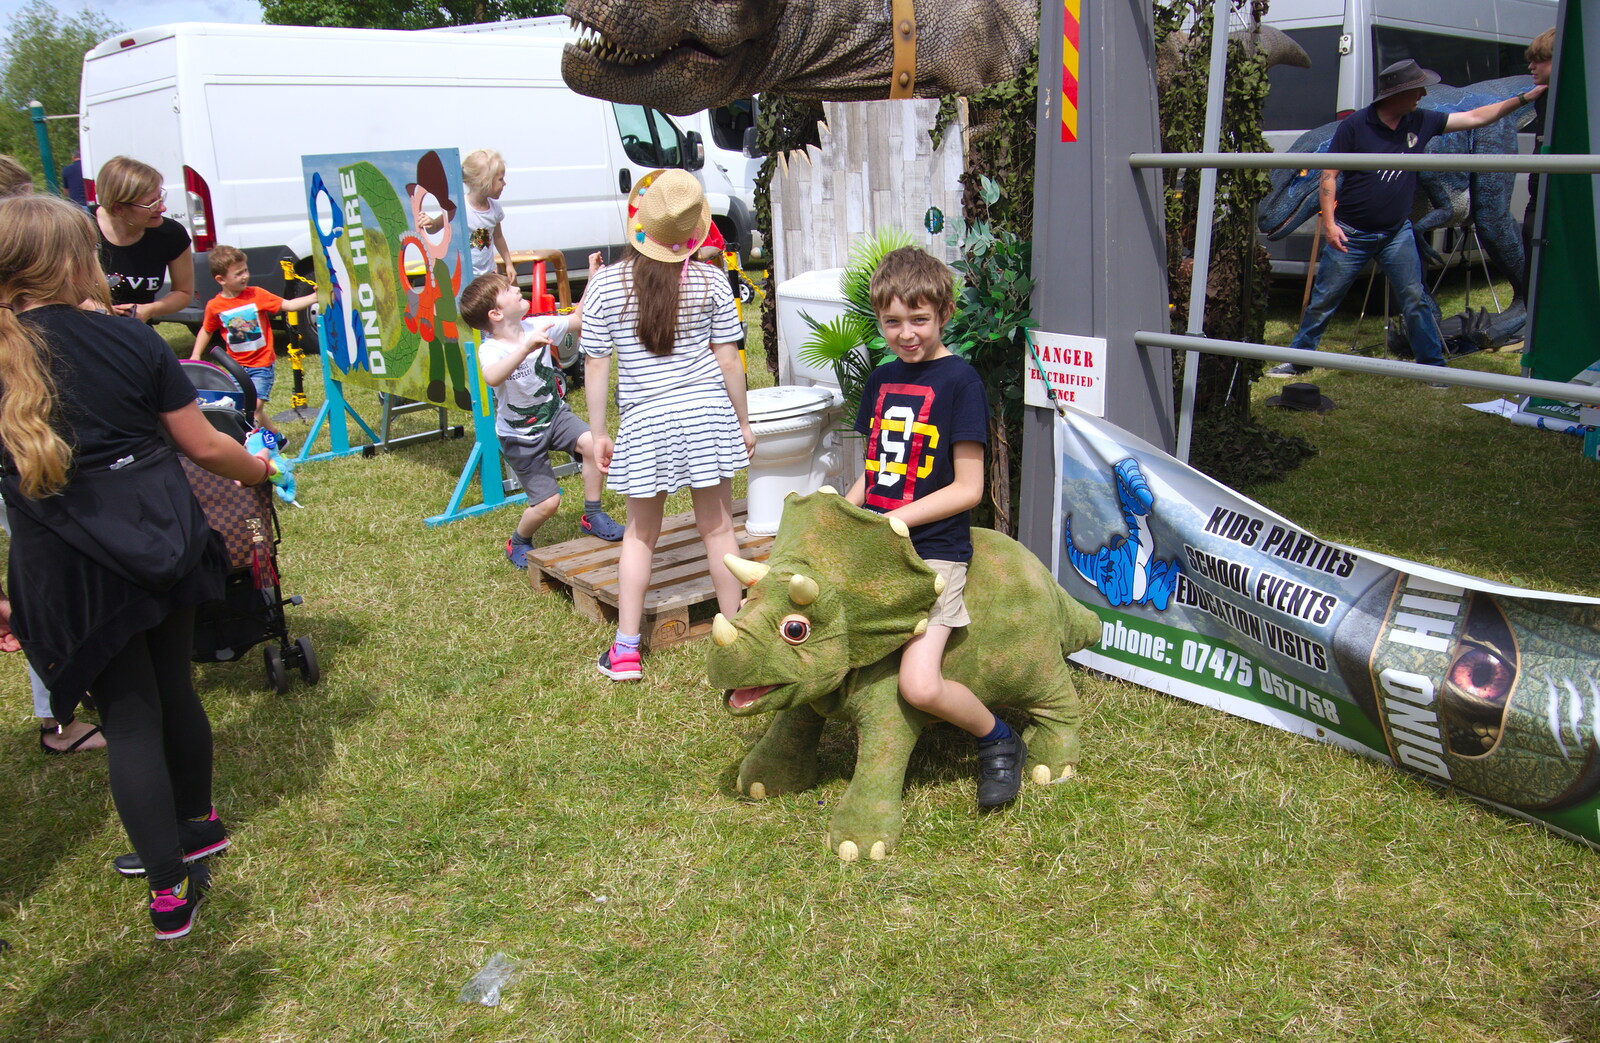 Fred rides a small triceratops from The Diss Carnival 2019, Diss, Norfolk - 9th June 2019